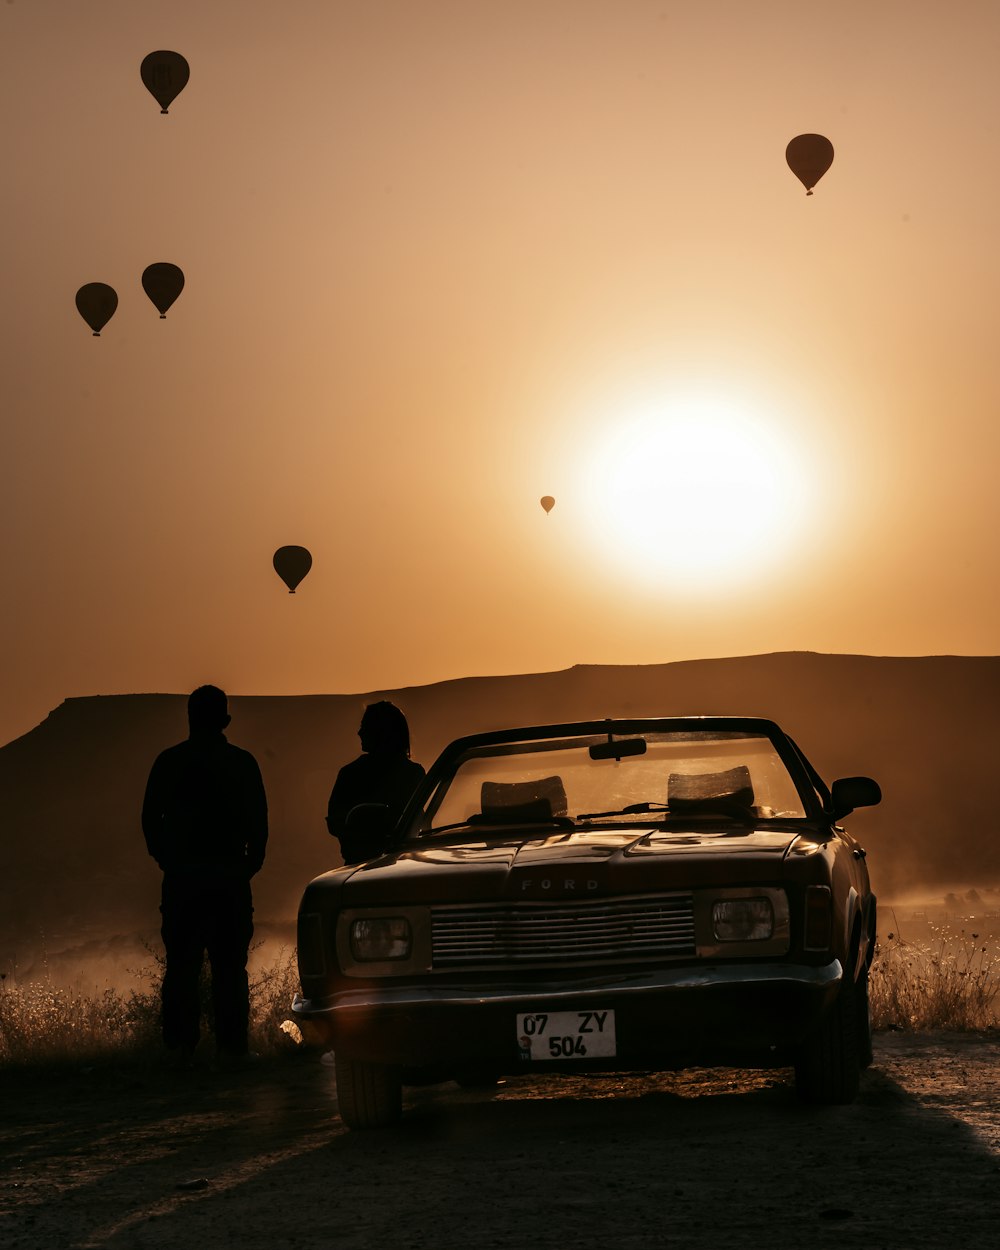 two men standing next to a car with hot air balloons in the sky